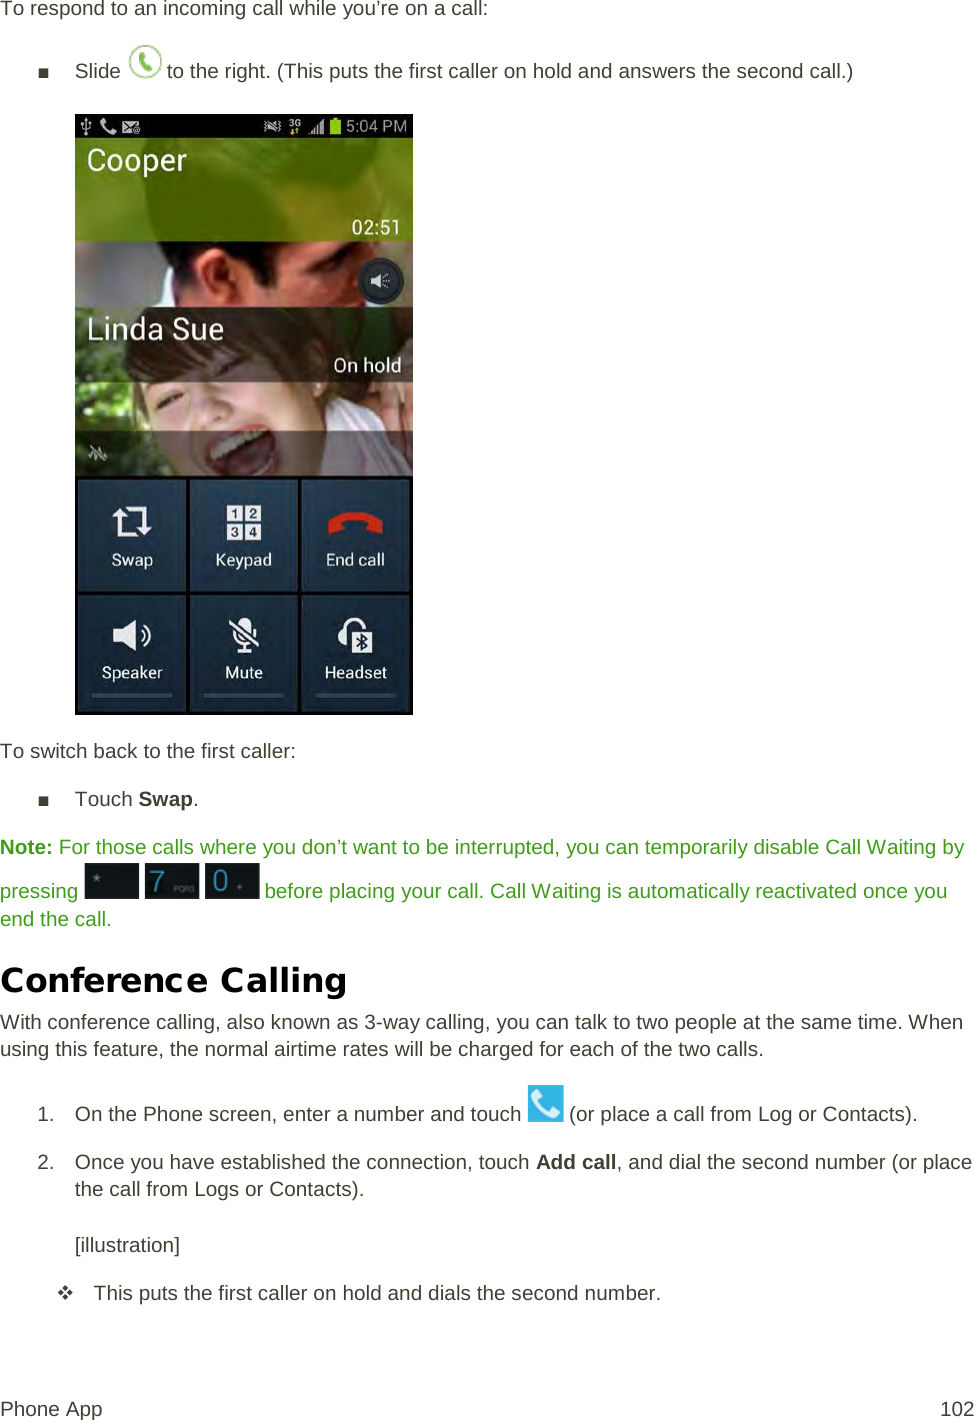 To respond to an incoming call while you’re on a call: ■ Slide   to the right. (This puts the first caller on hold and answers the second call.)   To switch back to the first caller: ■ Touch Swap. Note: For those calls where you don’t want to be interrupted, you can temporarily disable Call Waiting by pressing       before placing your call. Call Waiting is automatically reactivated once you end the call. Conference Calling With conference calling, also known as 3-way calling, you can talk to two people at the same time. When using this feature, the normal airtime rates will be charged for each of the two calls. 1. On the Phone screen, enter a number and touch   (or place a call from Log or Contacts). 2. Once you have established the connection, touch Add call, and dial the second number (or place the call from Logs or Contacts).   [illustration]  This puts the first caller on hold and dials the second number. Phone App 102 